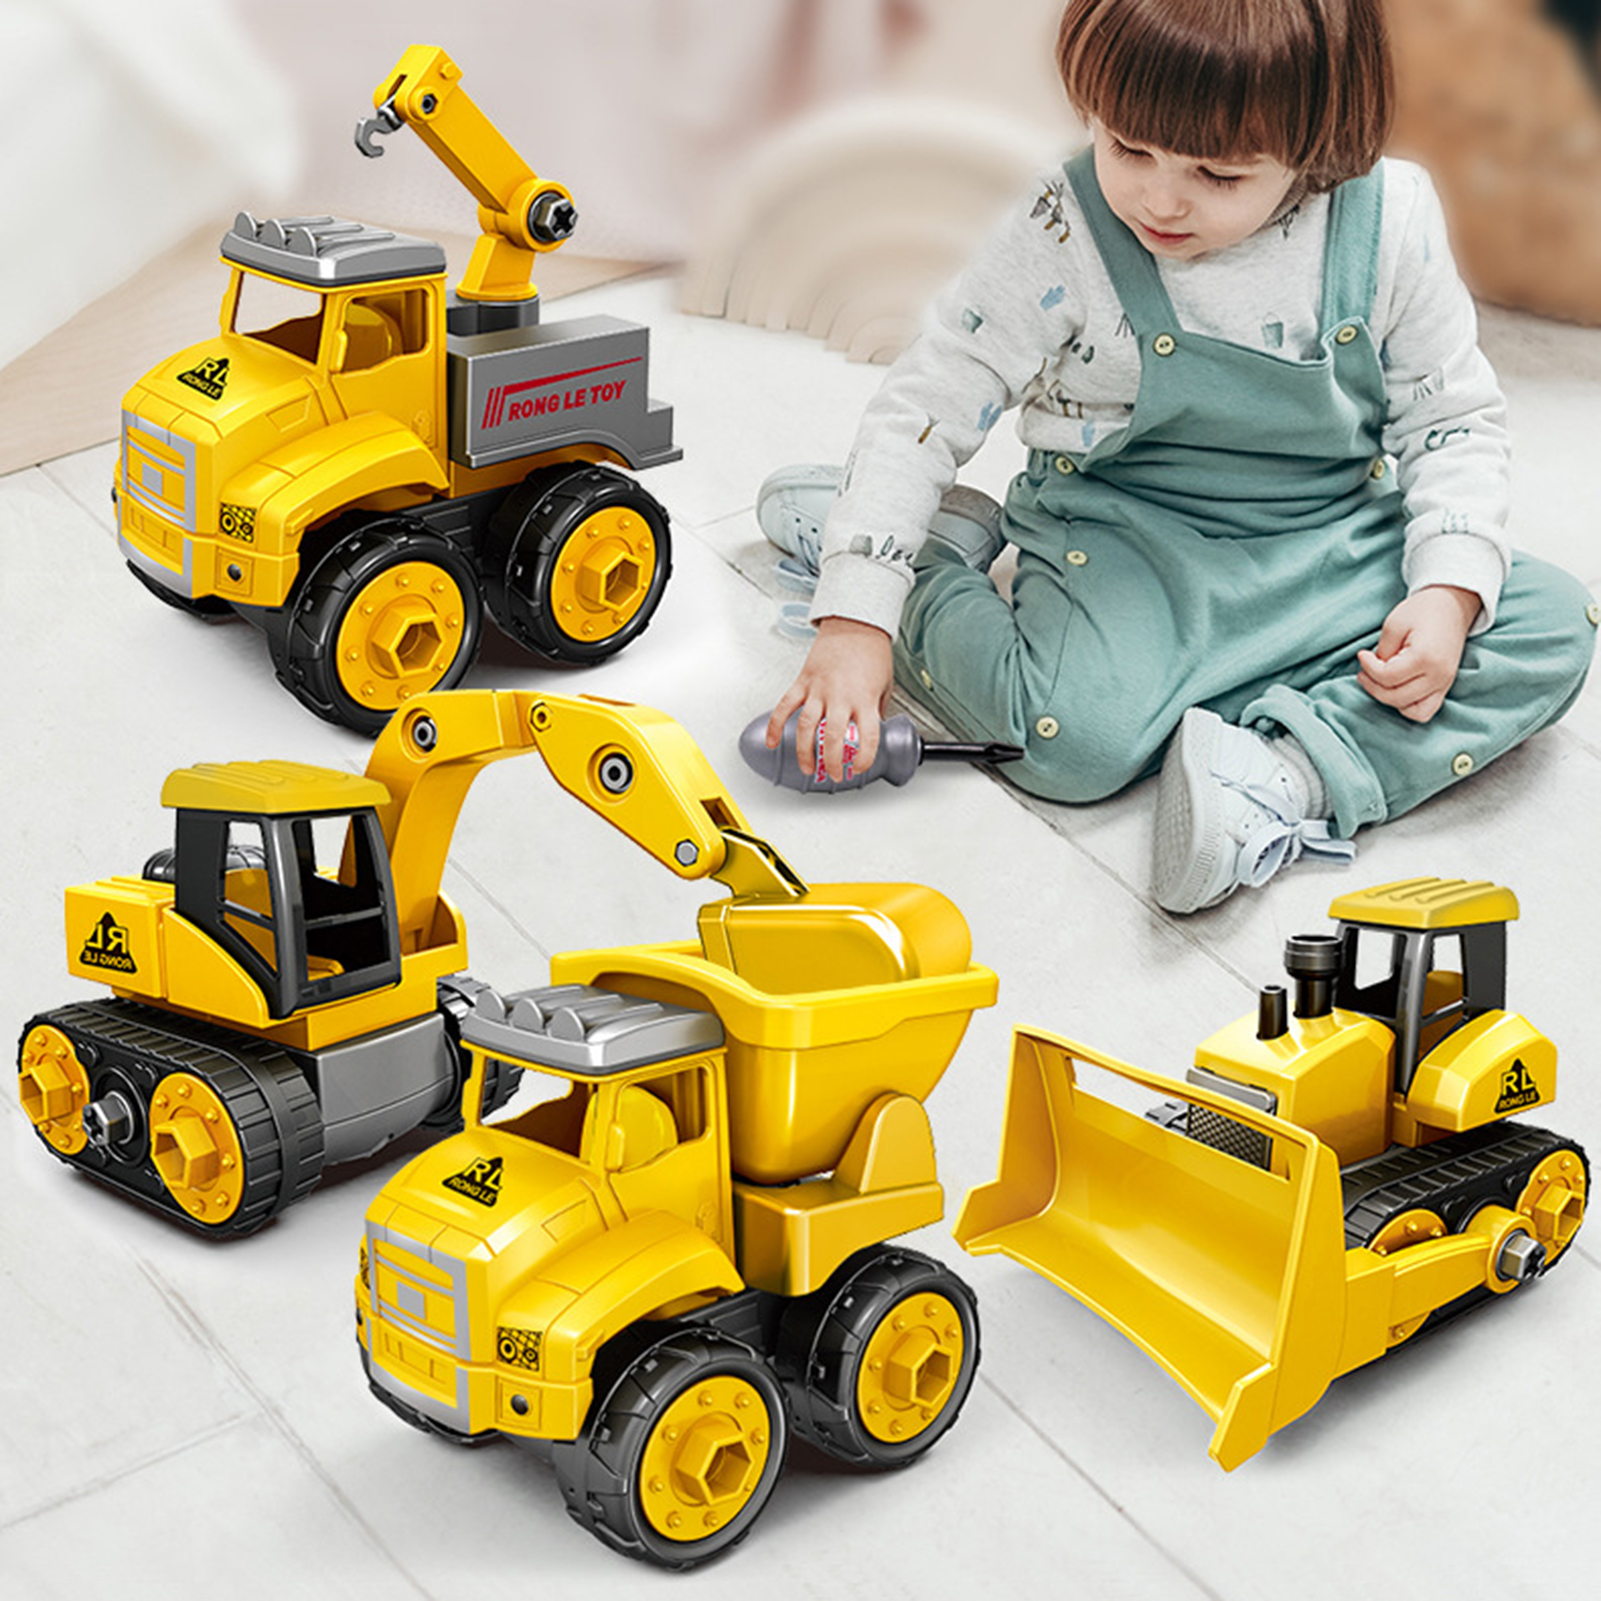 Pnellth Engineering Toy Detachable Assembly Easily Plastic Construction Vehicles Toy for Kids - image 2 of 8